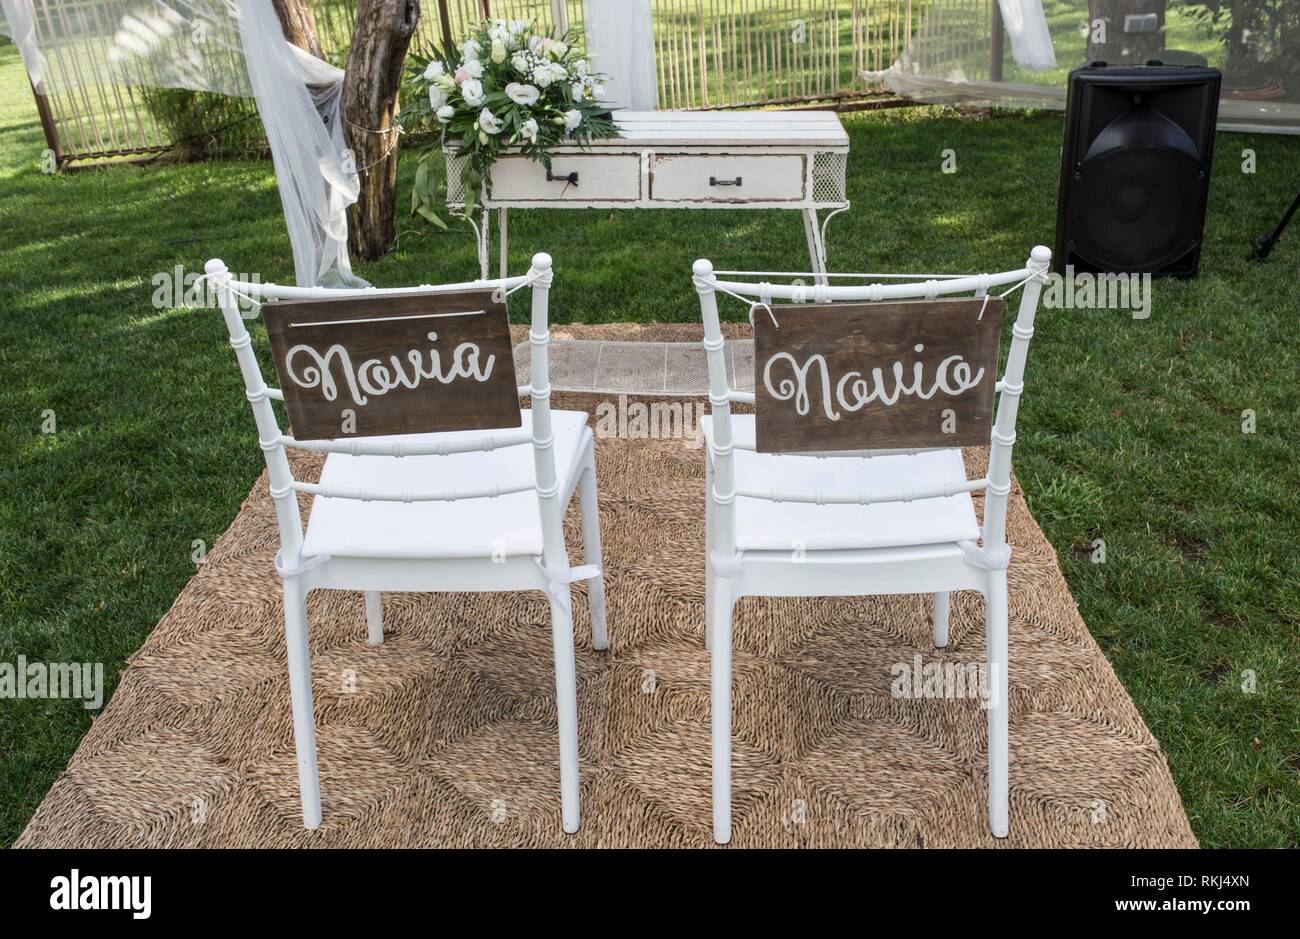 Chairs for bride and groom at altar. Spanish sign Novia y Novio. Stock Photo